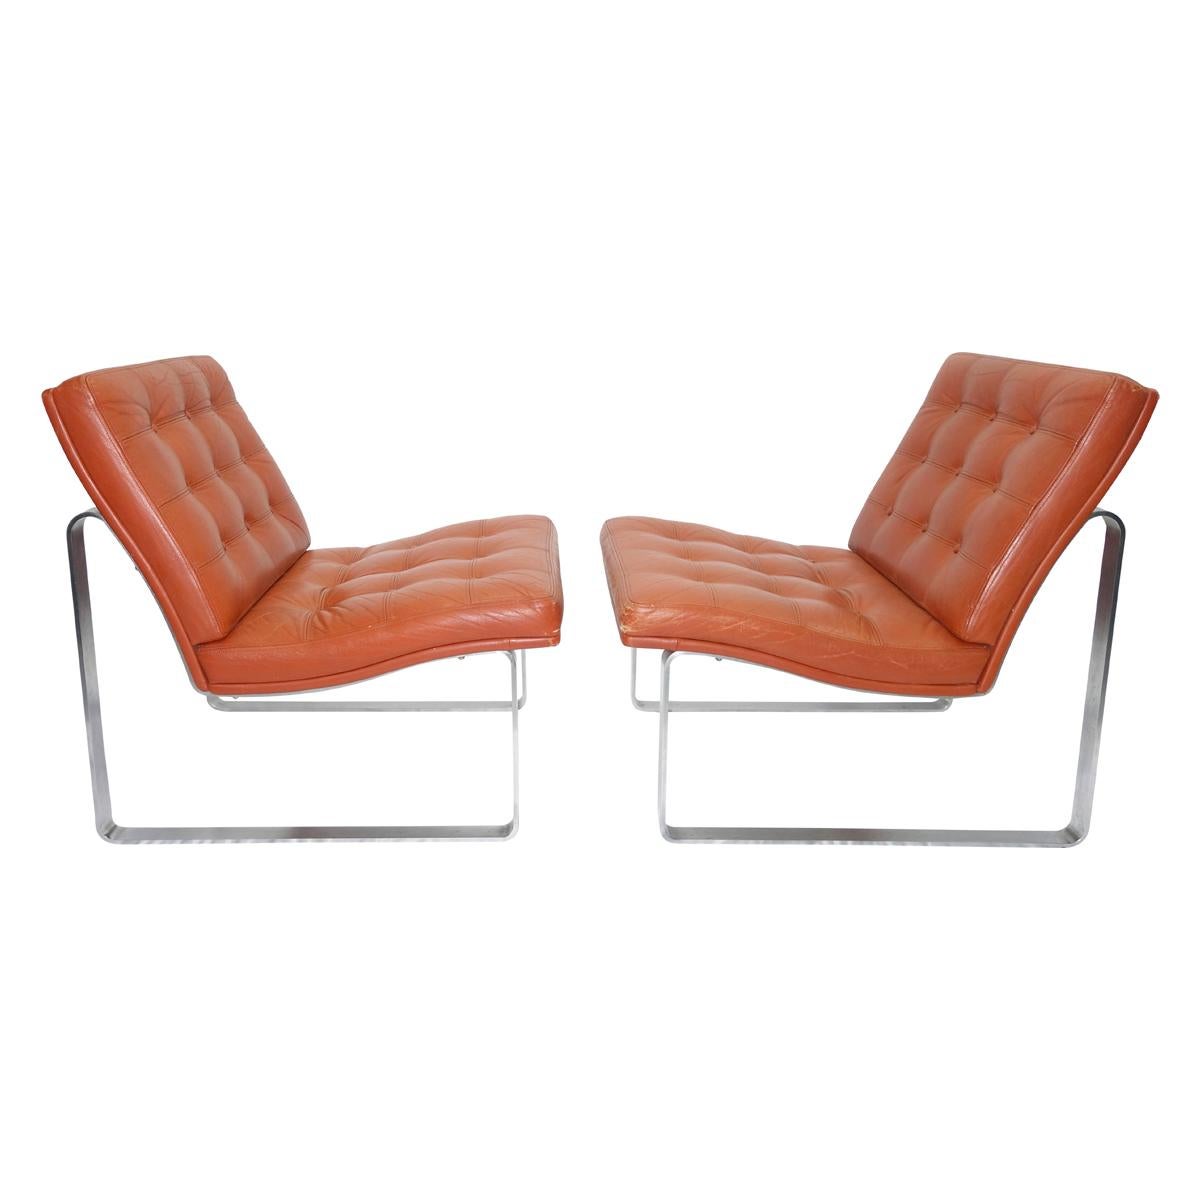 Mid-Century Modern Moduline Leather Chairs with Steel Legs by Ole Gjerløv-Knudsen for France & Son For Sale